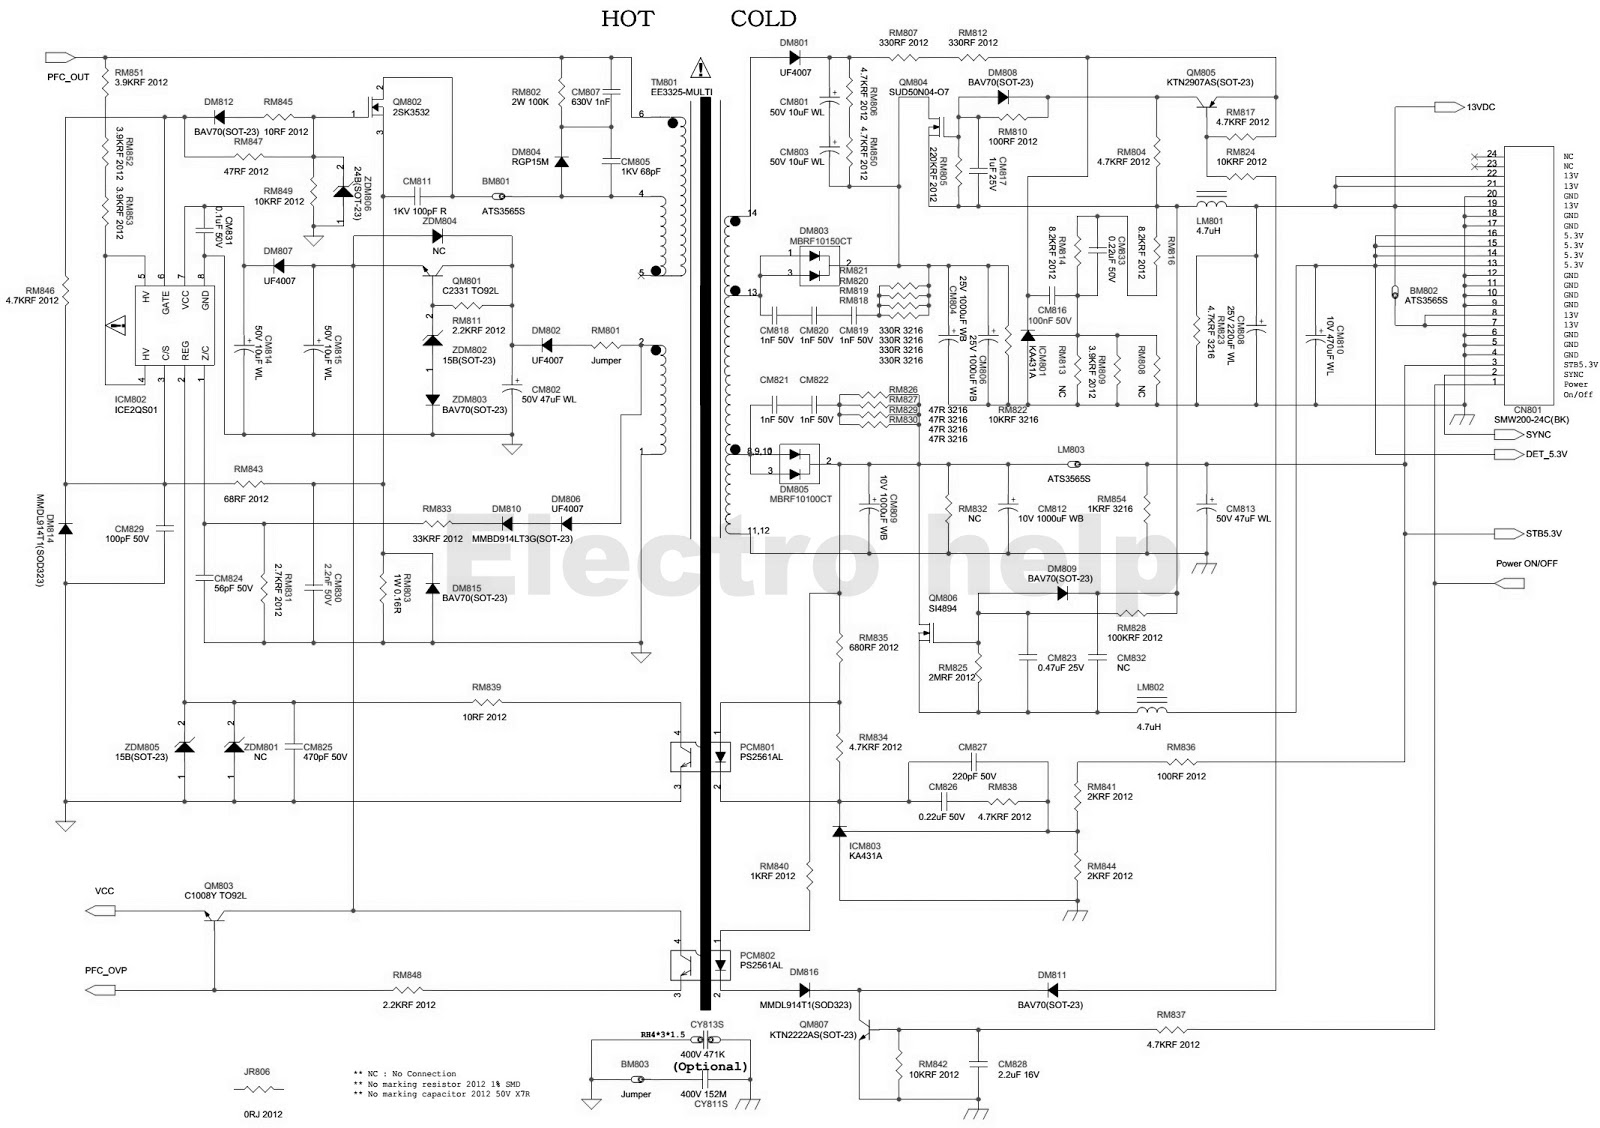 BN44-00197 - SAMSUNG LCD TV POWER SUPPLY CIRCUIT DIAGRAM - Tips And